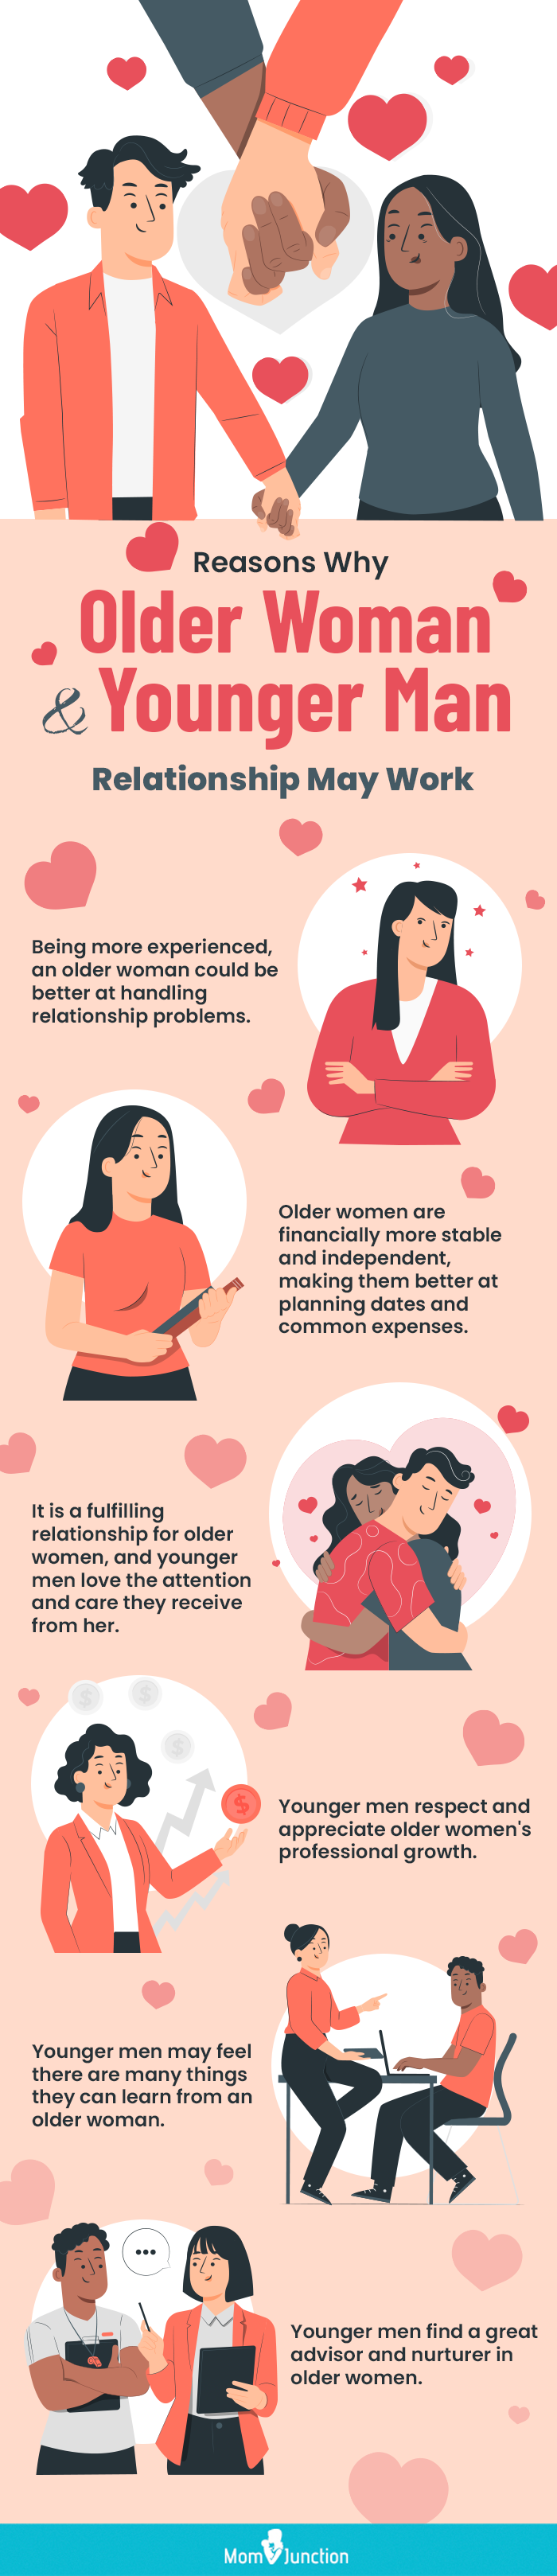 12 Reasons Why Older Women Like Younger